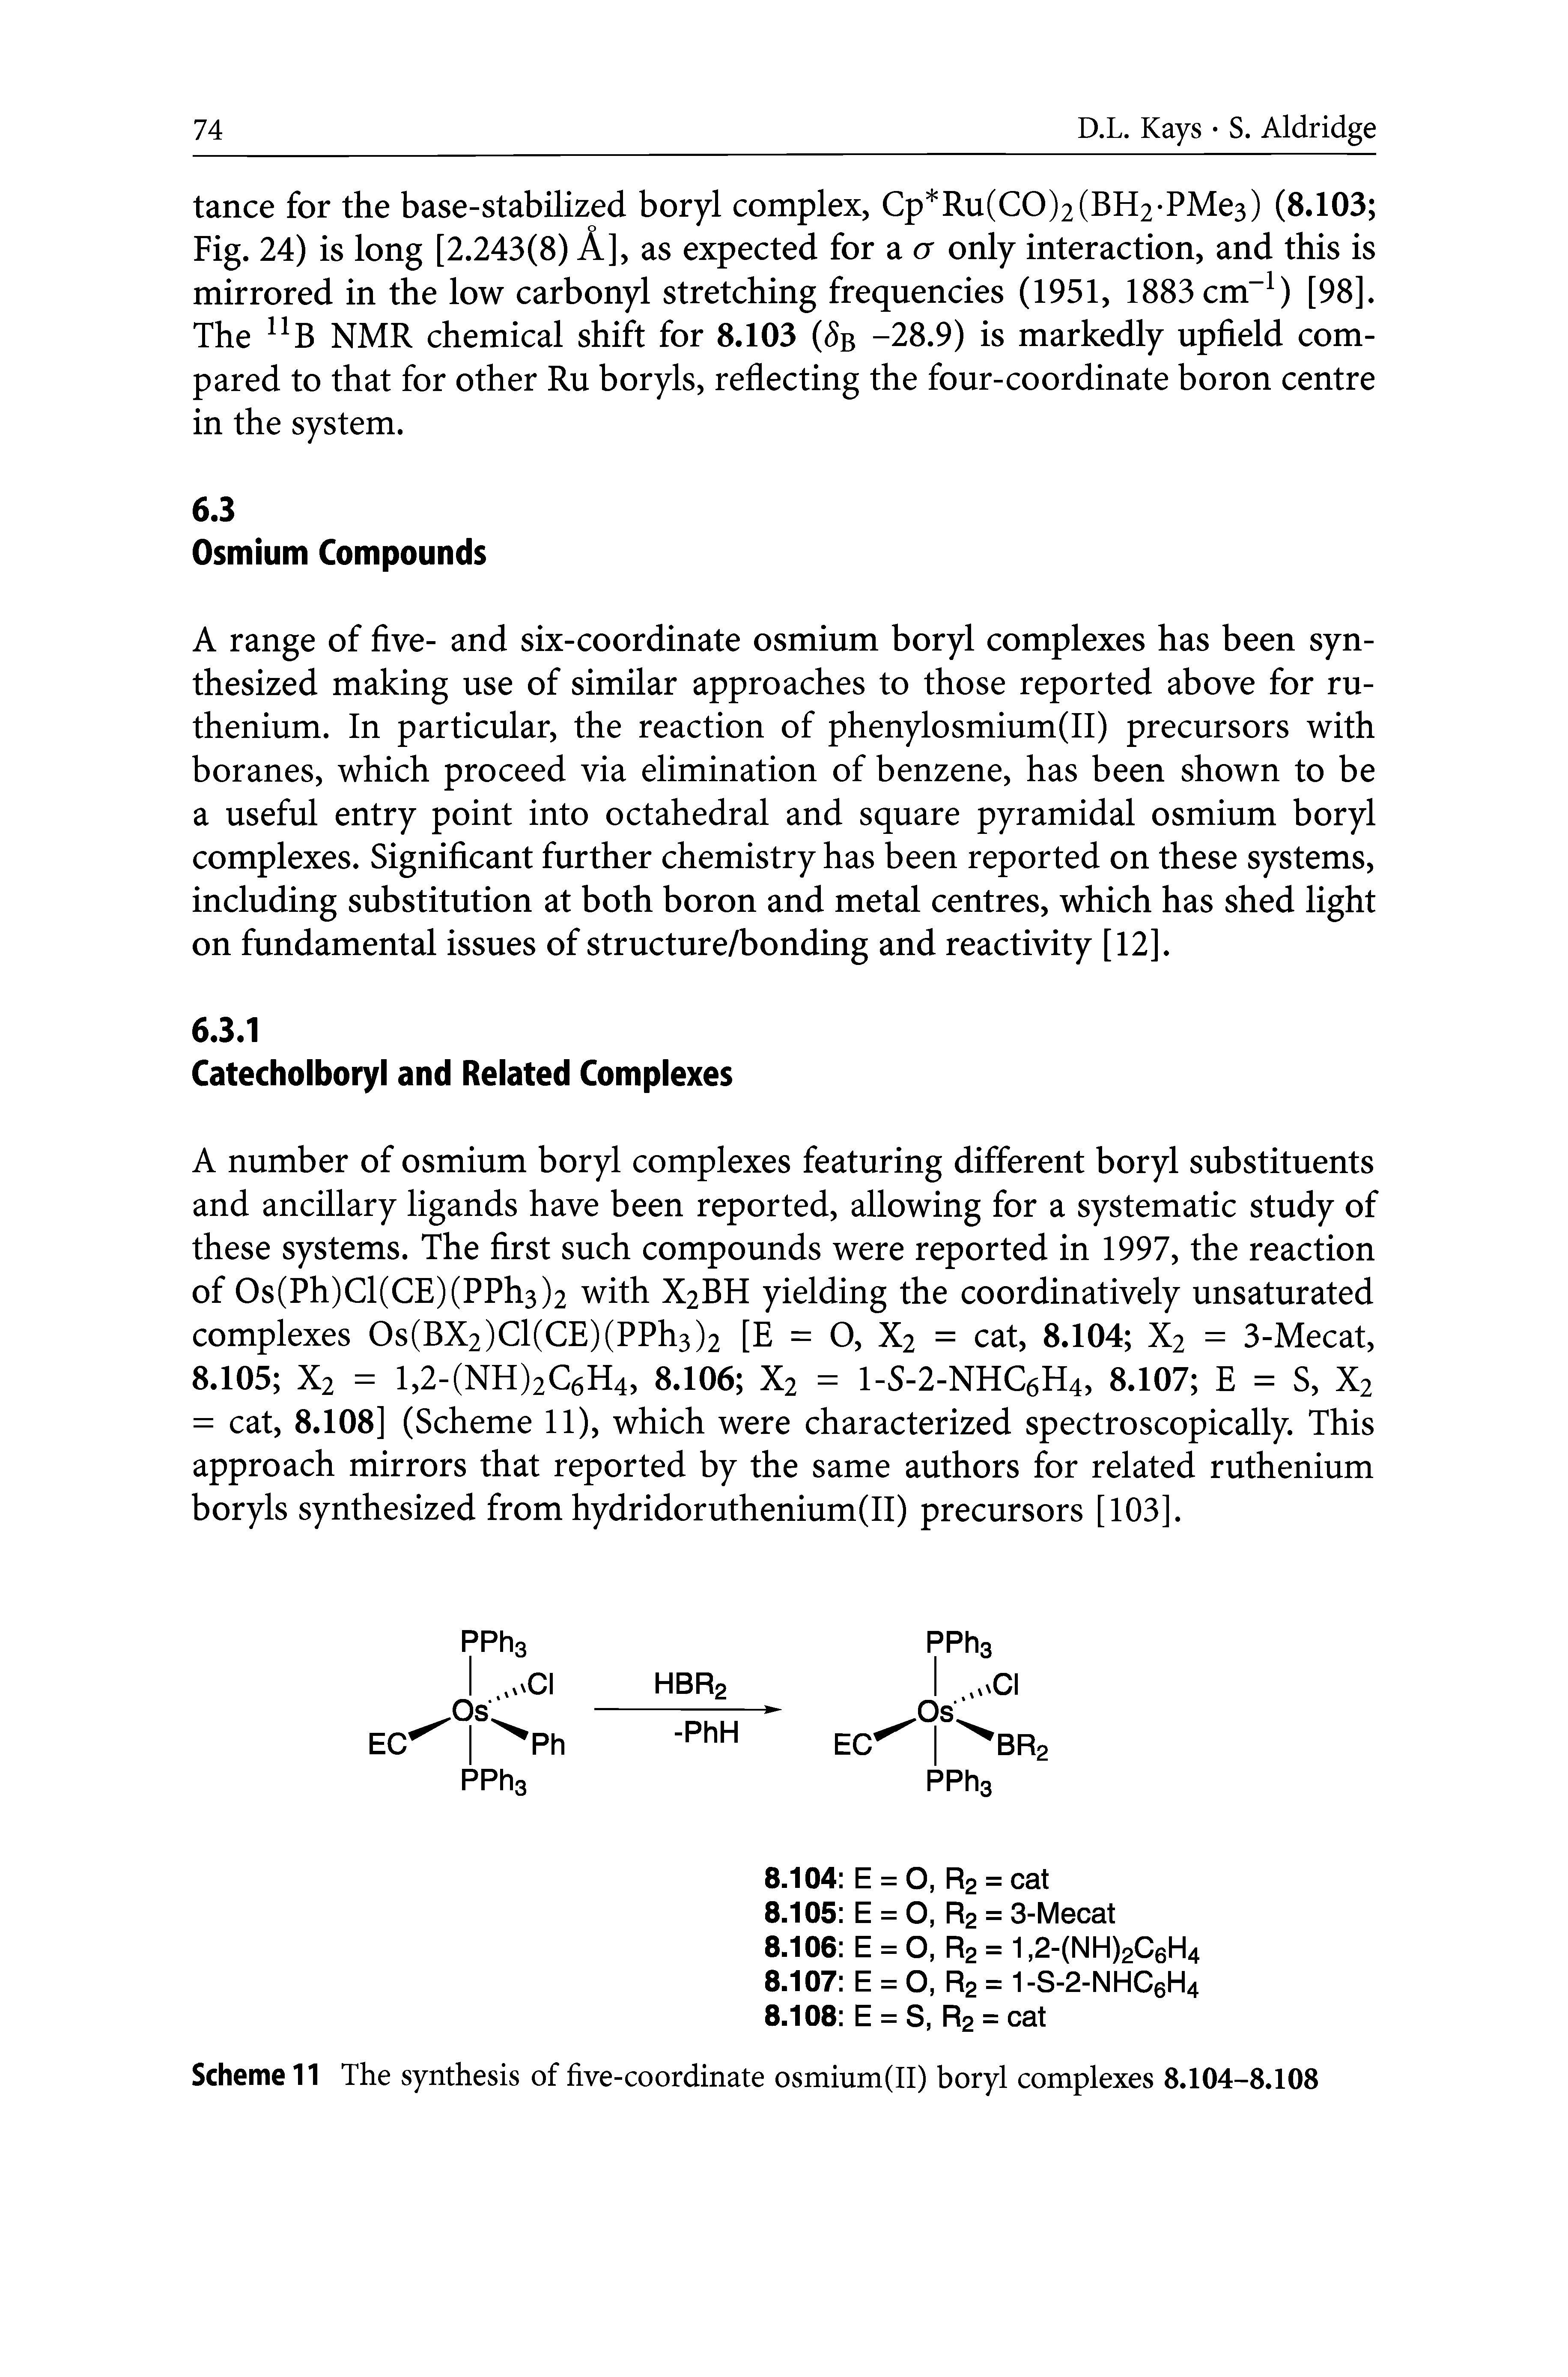 Scheme 11 The synthesis of five-coordinate osmium(II) boryl complexes 8.104-8.108...